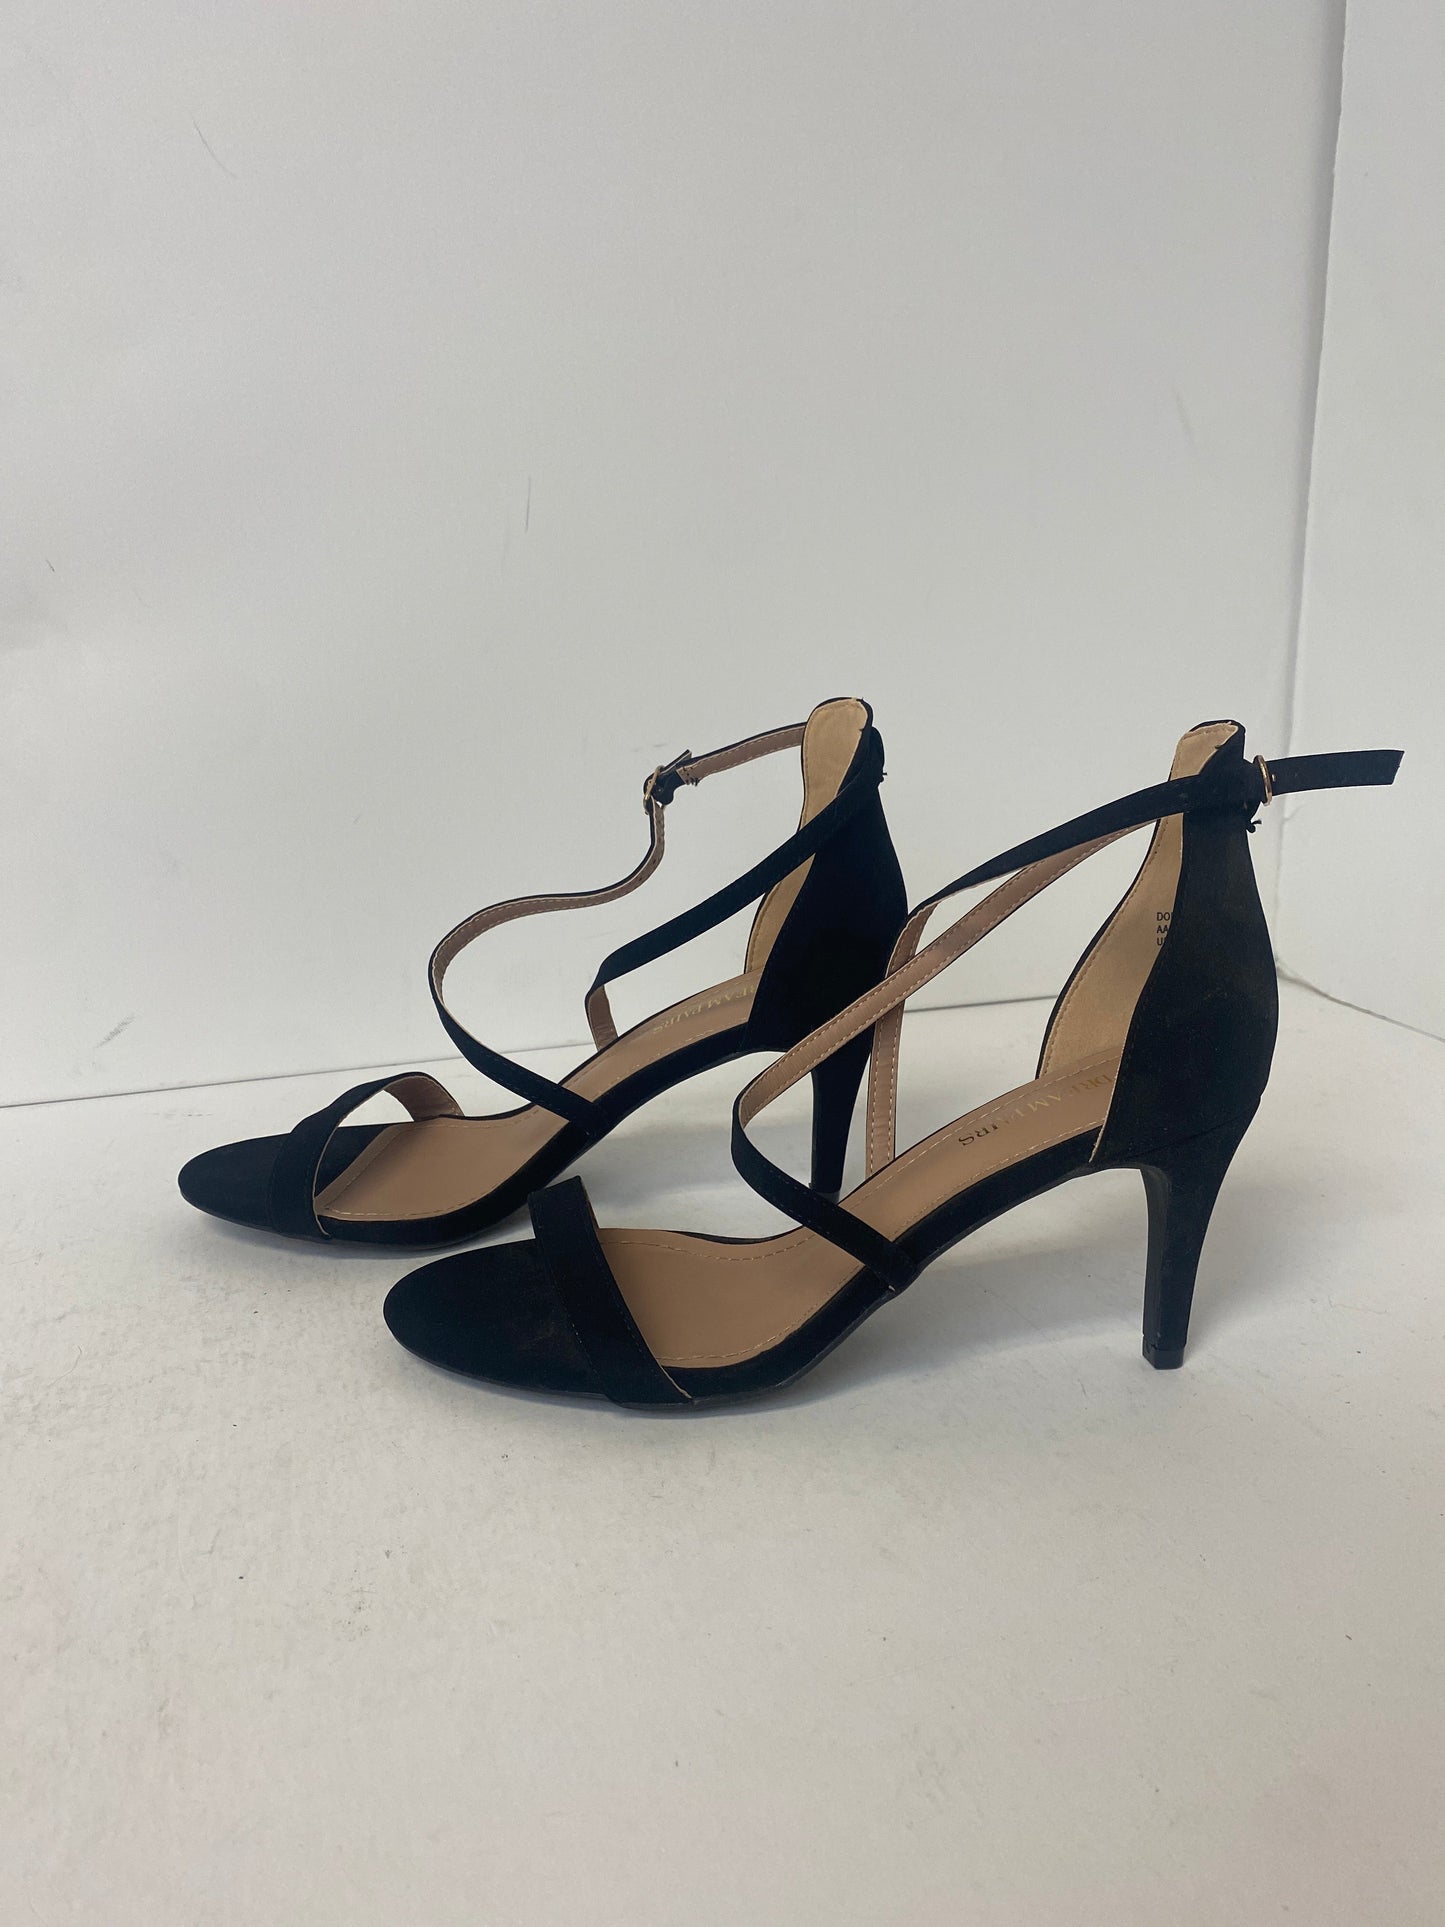 Shoes Heels Stiletto By Clothes Mentor  Size: 11